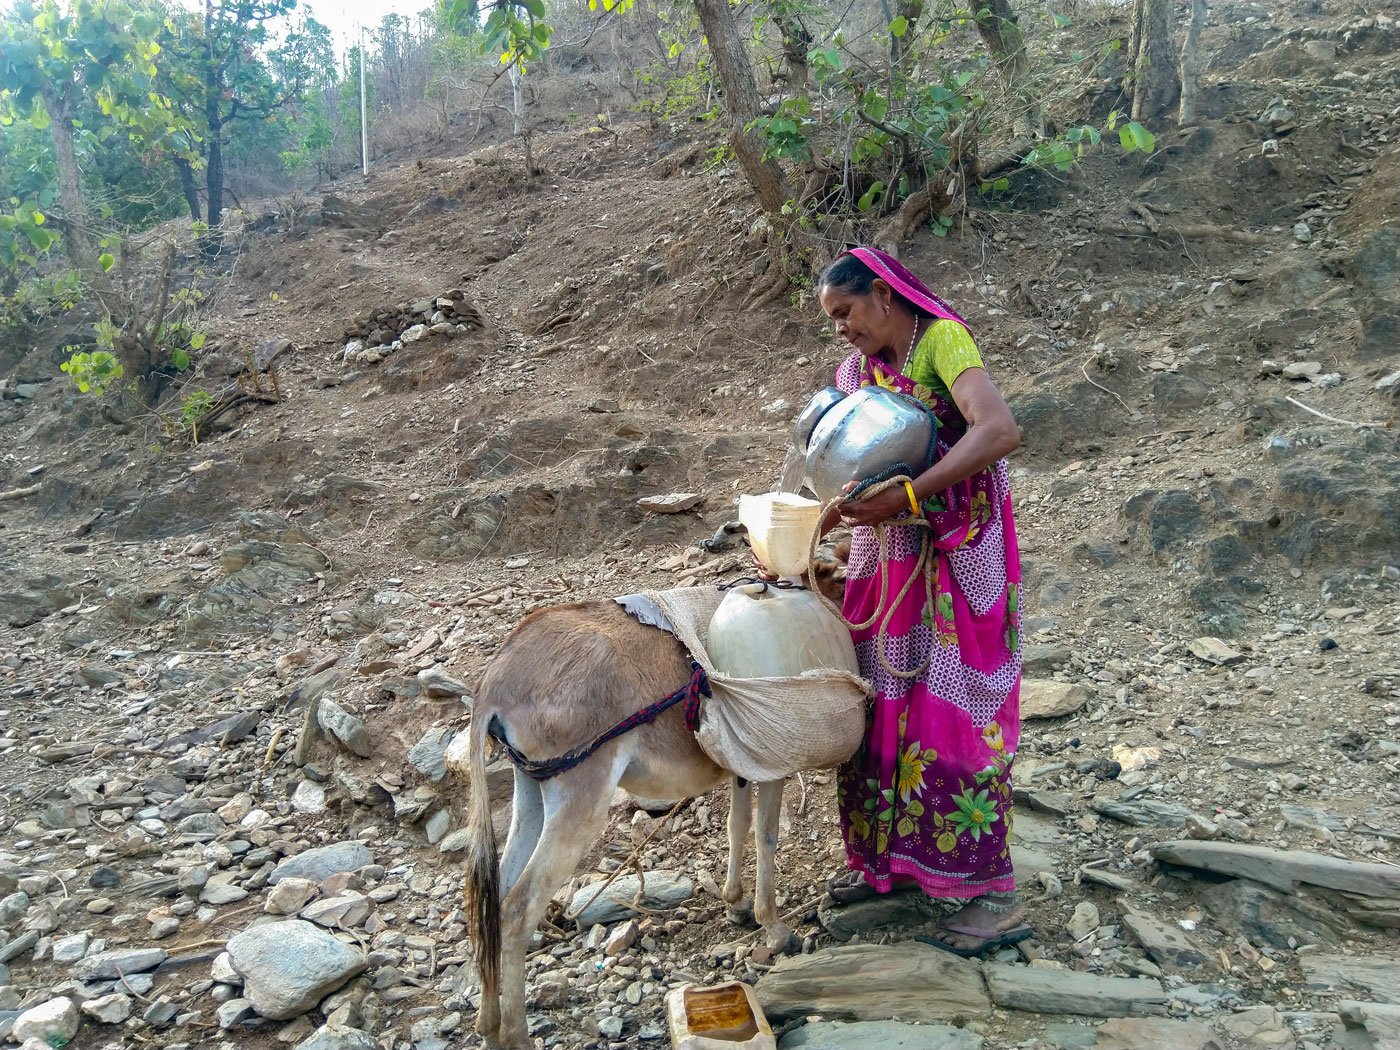 Dali Bada and her donkey. She is filling water into the cans